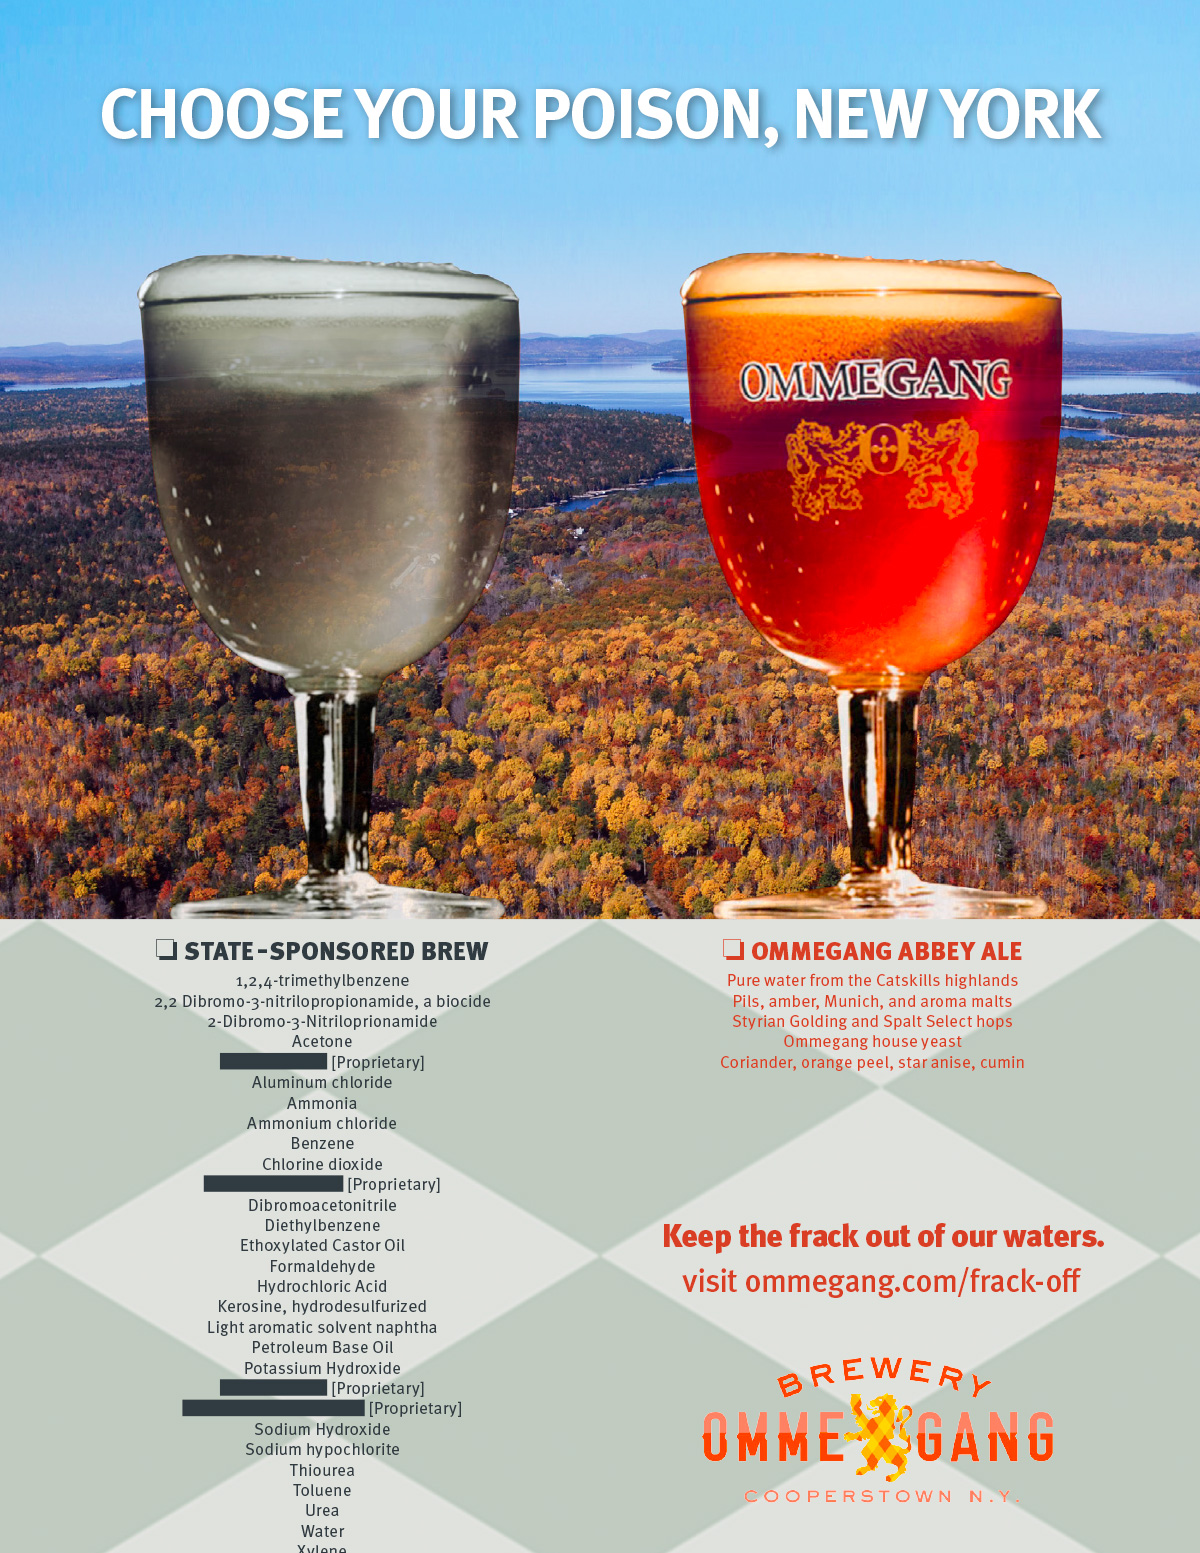 Ommegang Abbey Ale anti-fracking print ad